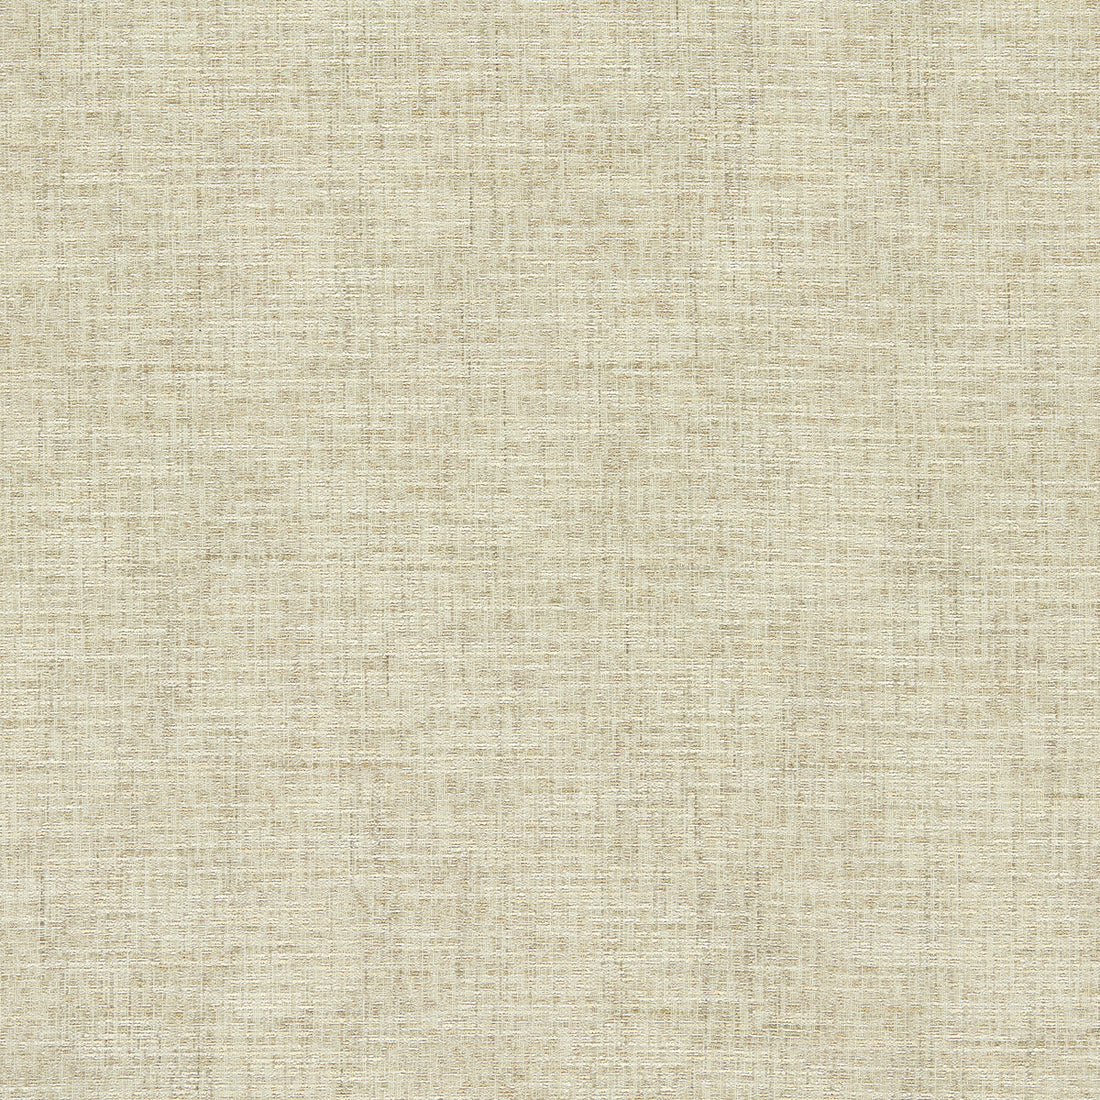 Cetara fabric in natural color - pattern F1642/12.CAC.0 - by Clarke And Clarke in the Cetara collection